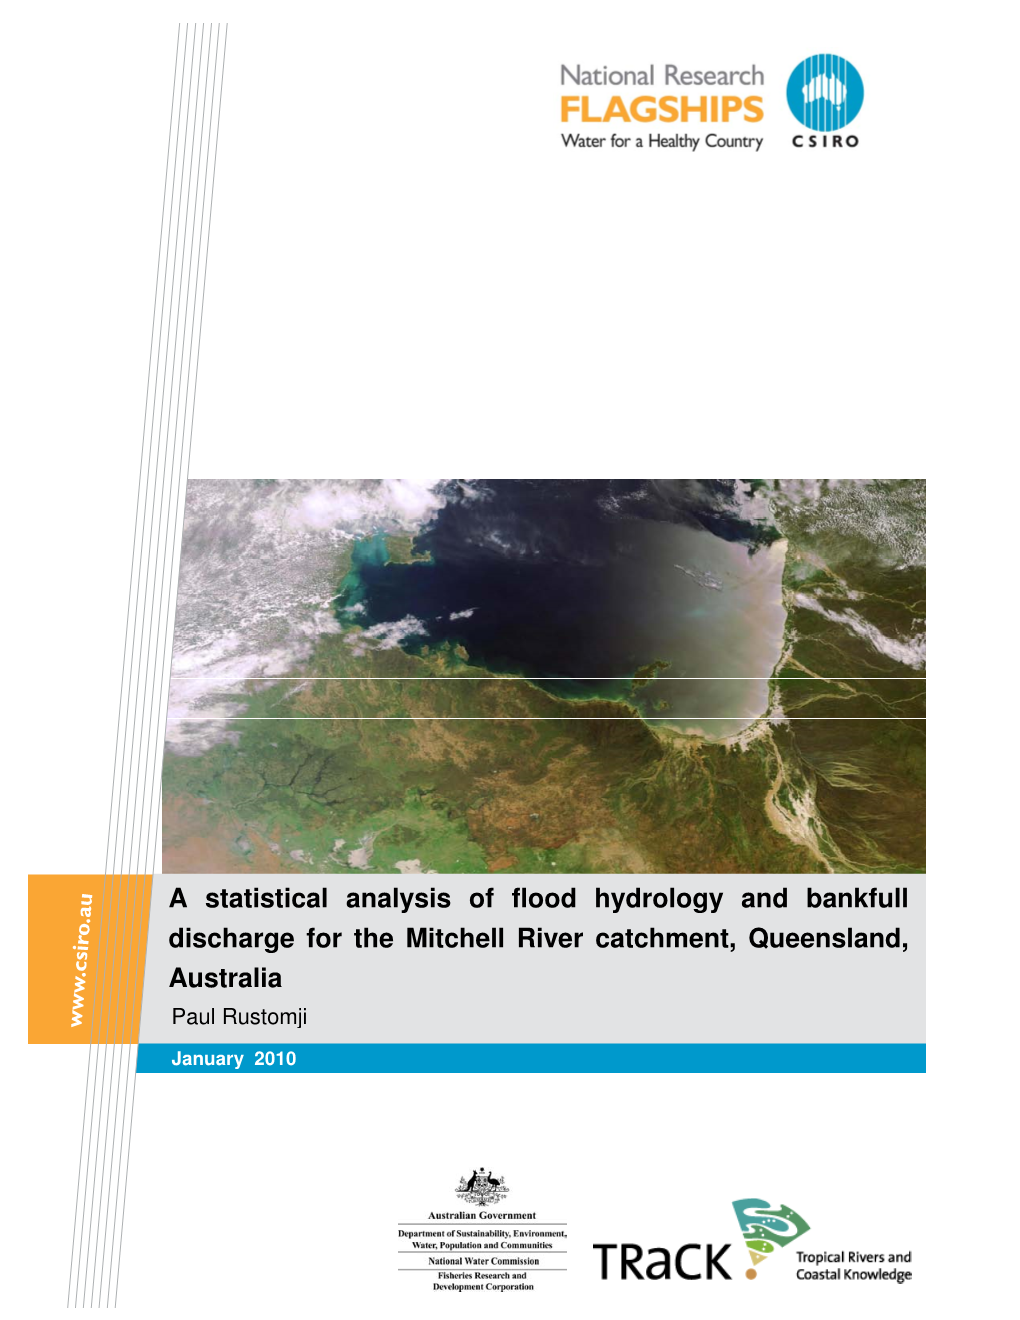 A Statistical Analysis of Flood Hydrology and Bankfull Discharge for the Mitchell River Catchment, Queensland, Australia Paul Rustomji